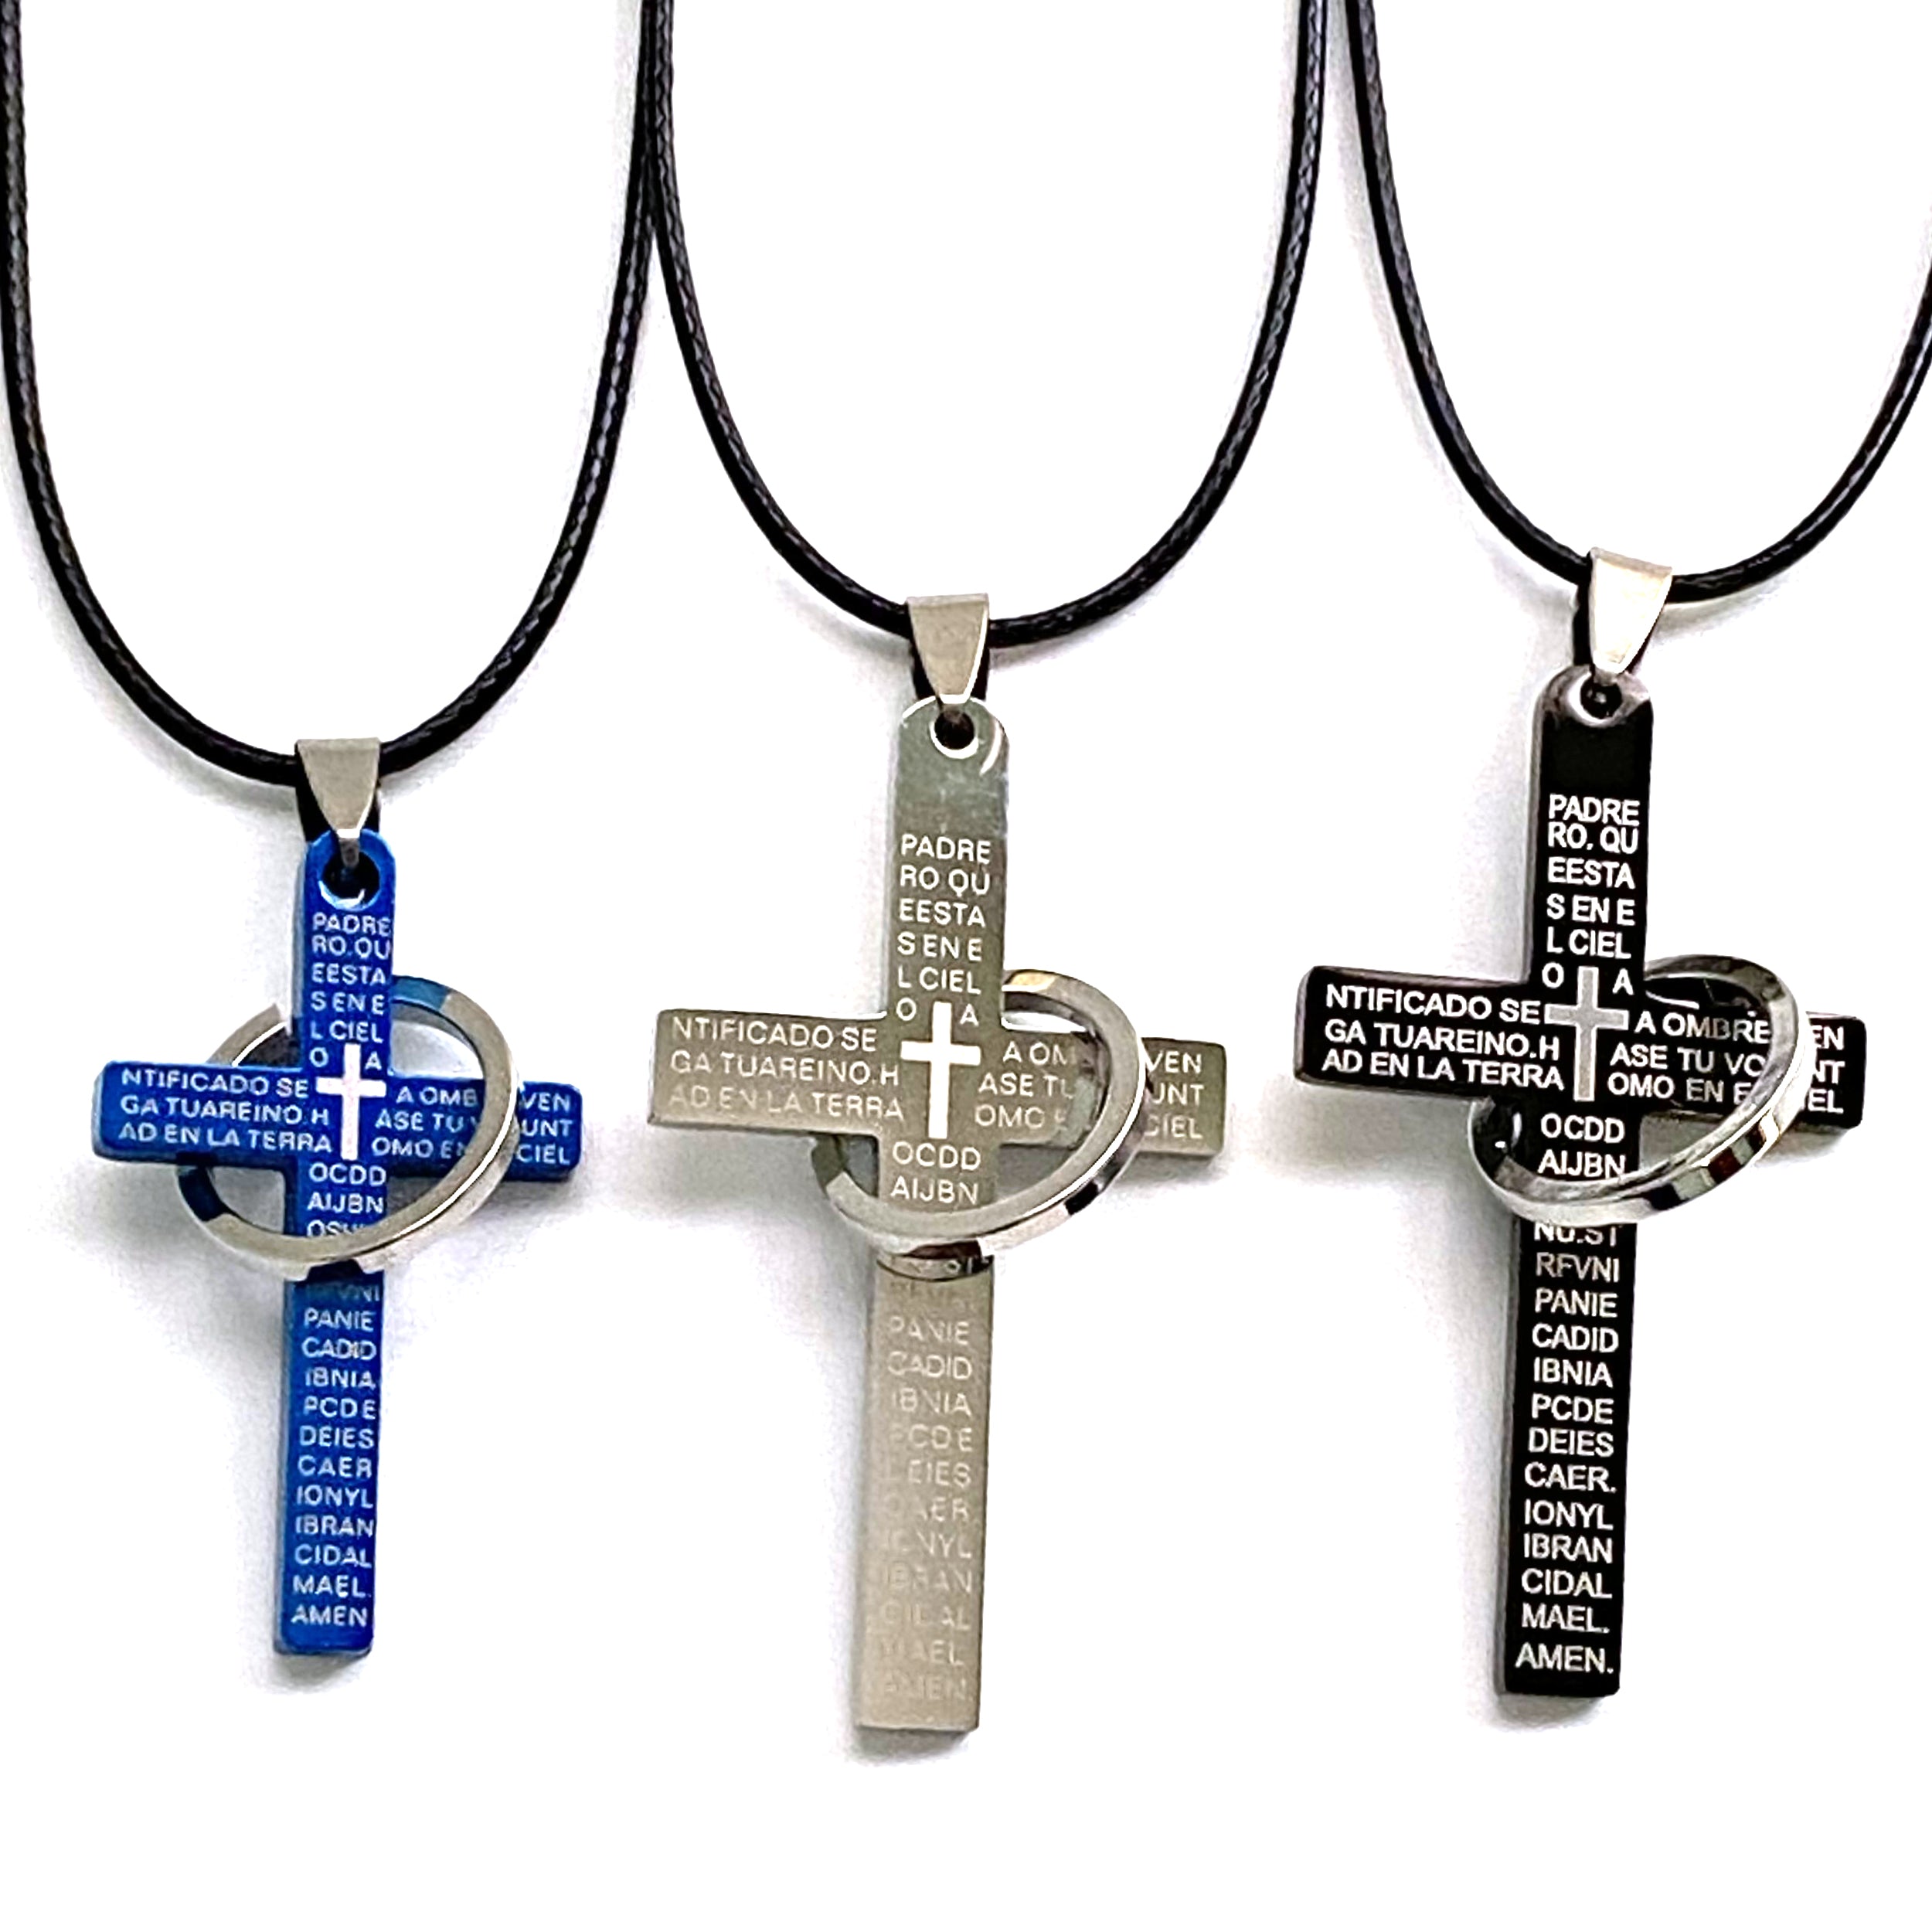 Black Cross Necklace for Men, Stainless Steel Cross Pendant for Men Necklace  Cross Chain 22inch, Crystal Inlay Cross Necklace Pendant Great Gifts for  Dad, Father's Day Christmas Valentine's Day Gift for Men |